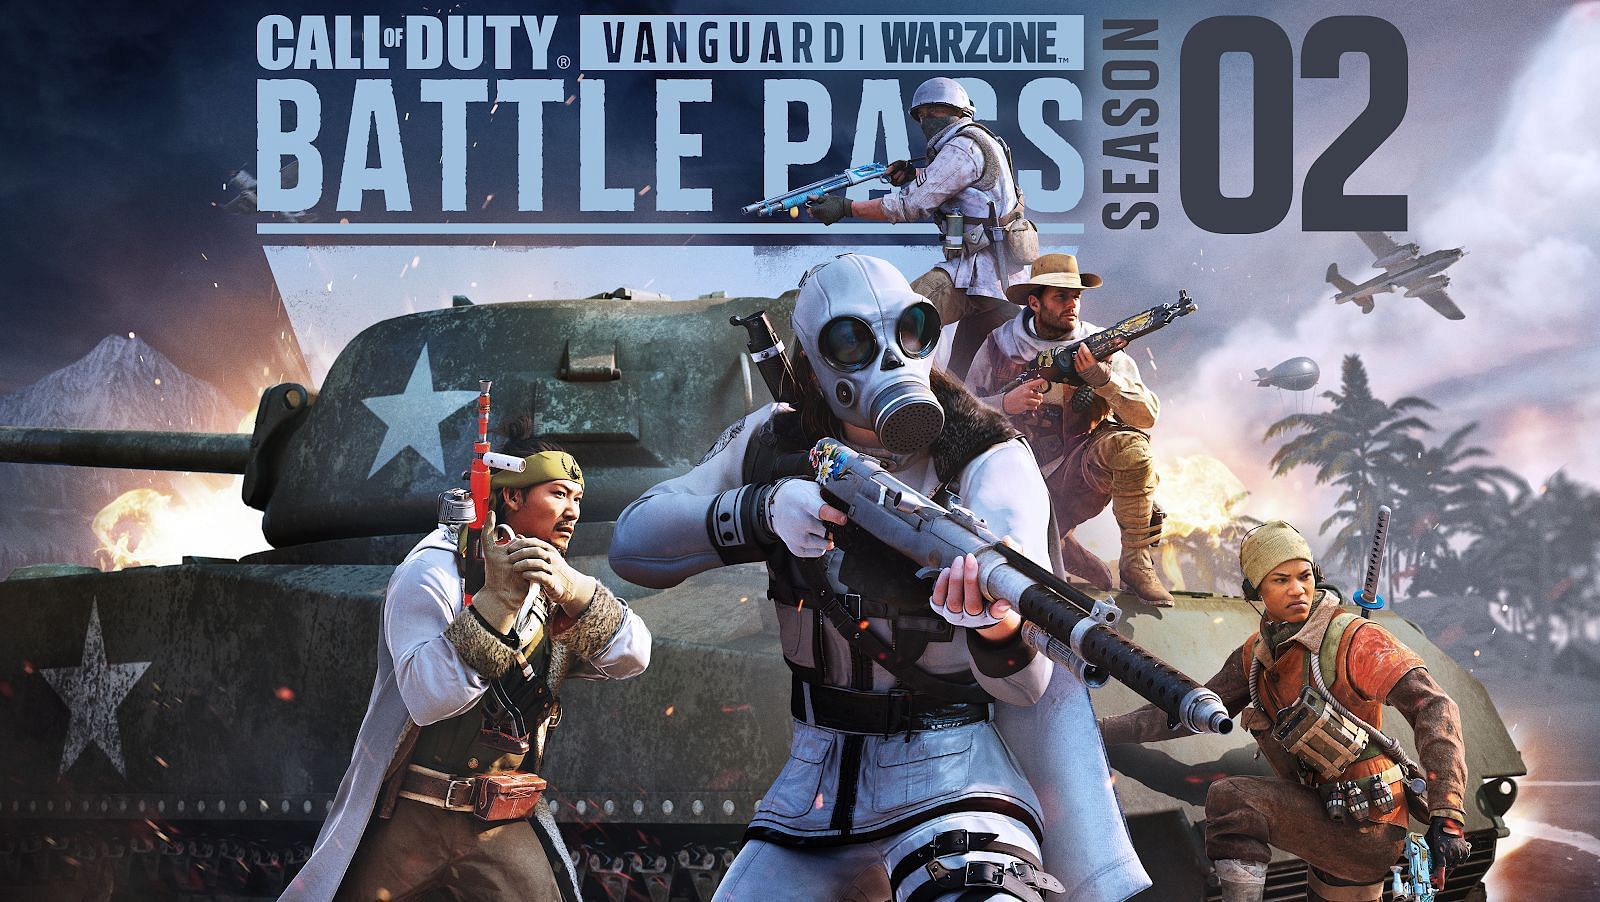 Call of Duty Warzone Season Two Battle Pass (Image by Call of Duty)